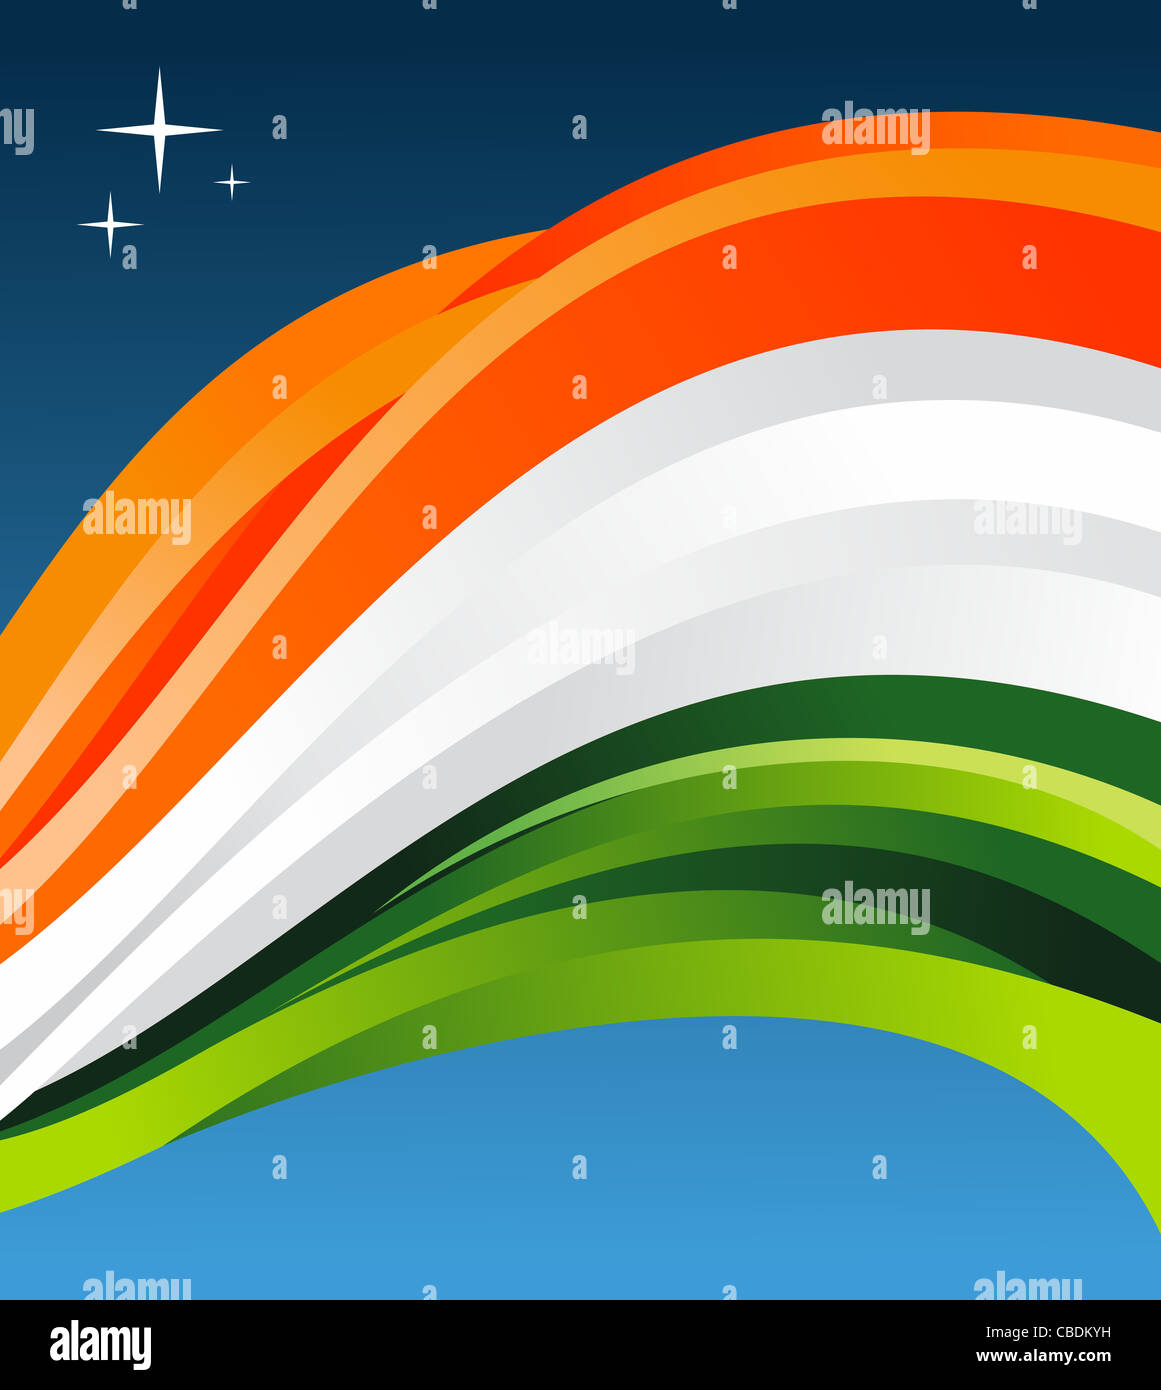 India flag illustration fluttering on blue background. Vector file available. Stock Photo